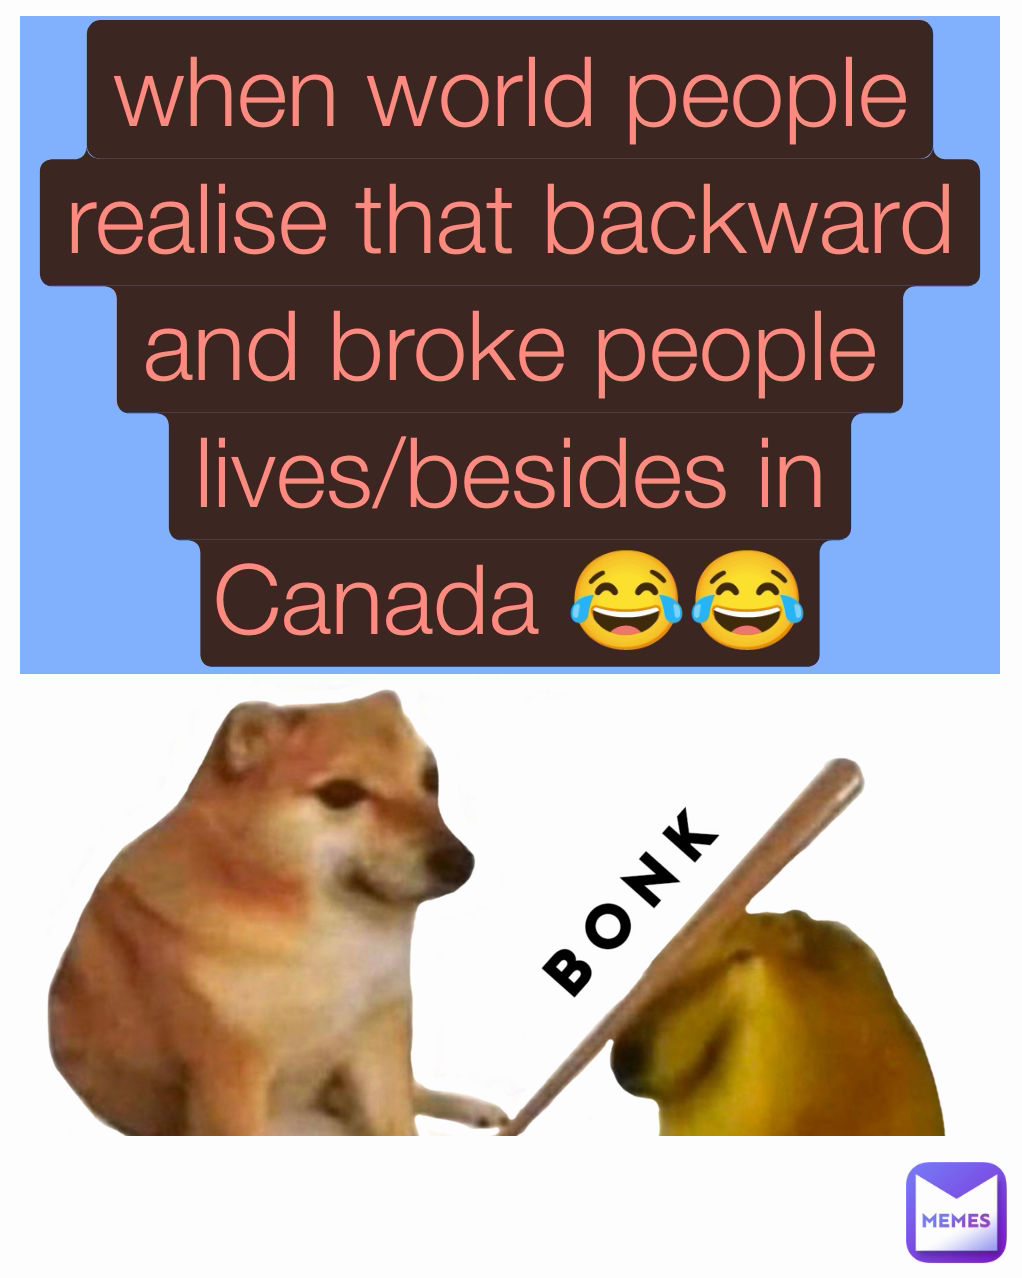 when world people realise that backward and broke people lives/besides in Canada 😂😂